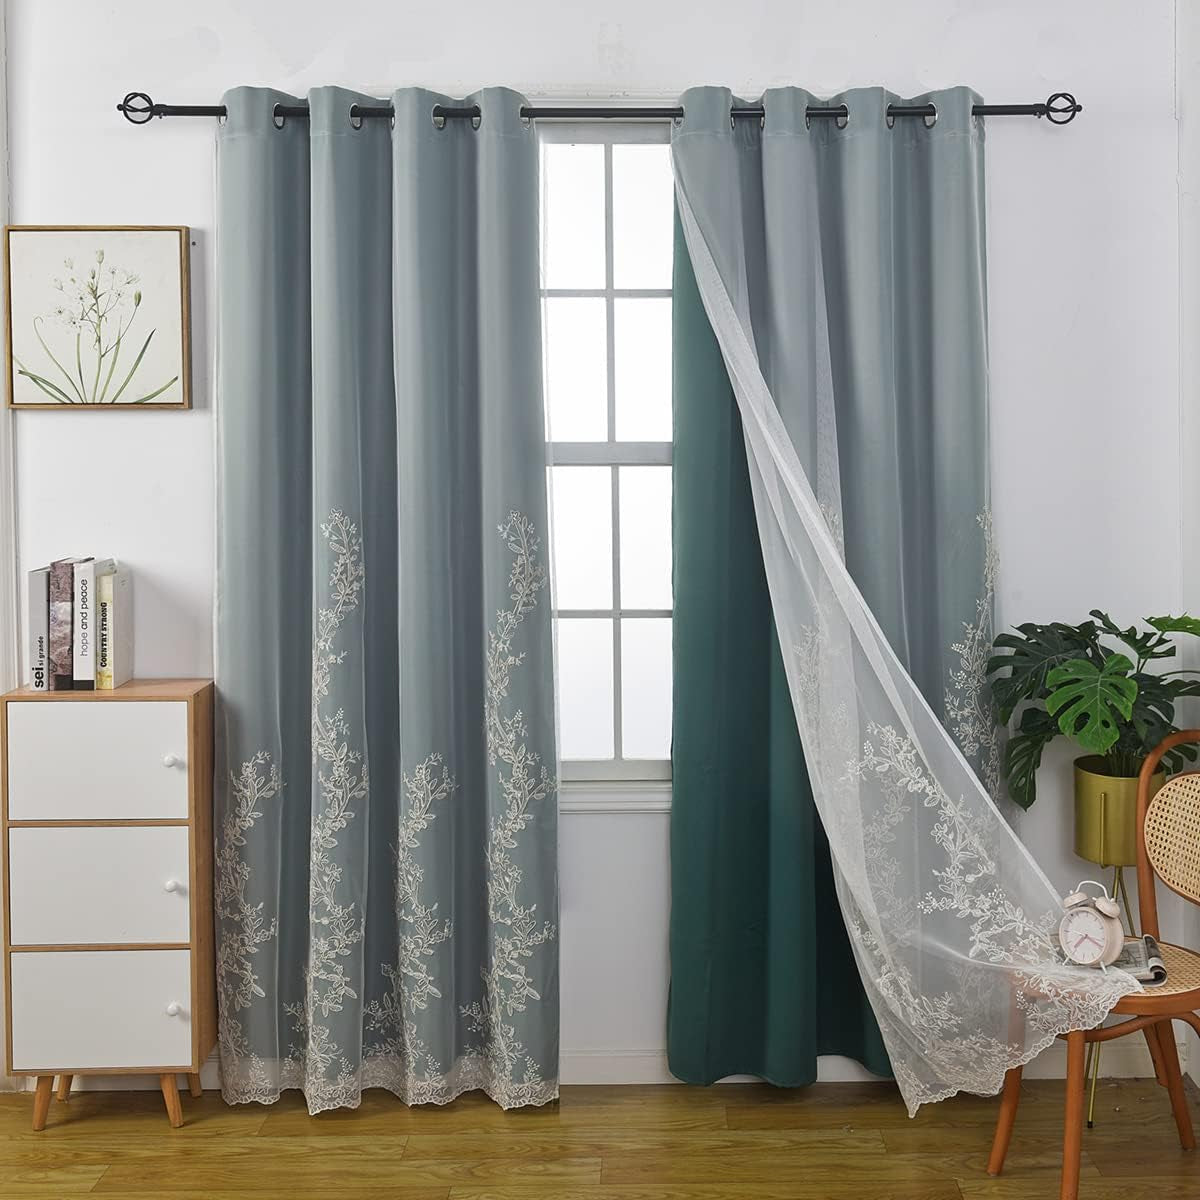 GYROHOME Double Layered Curtains with Embroidered White Sheer Tulle, Mix and Match Curtains Room Darkening Grommet Top Thermal Insulated Drapes,2Panels,52X84Inch,Beige  GYROHOME Dark Green 52Wx63Lx2 